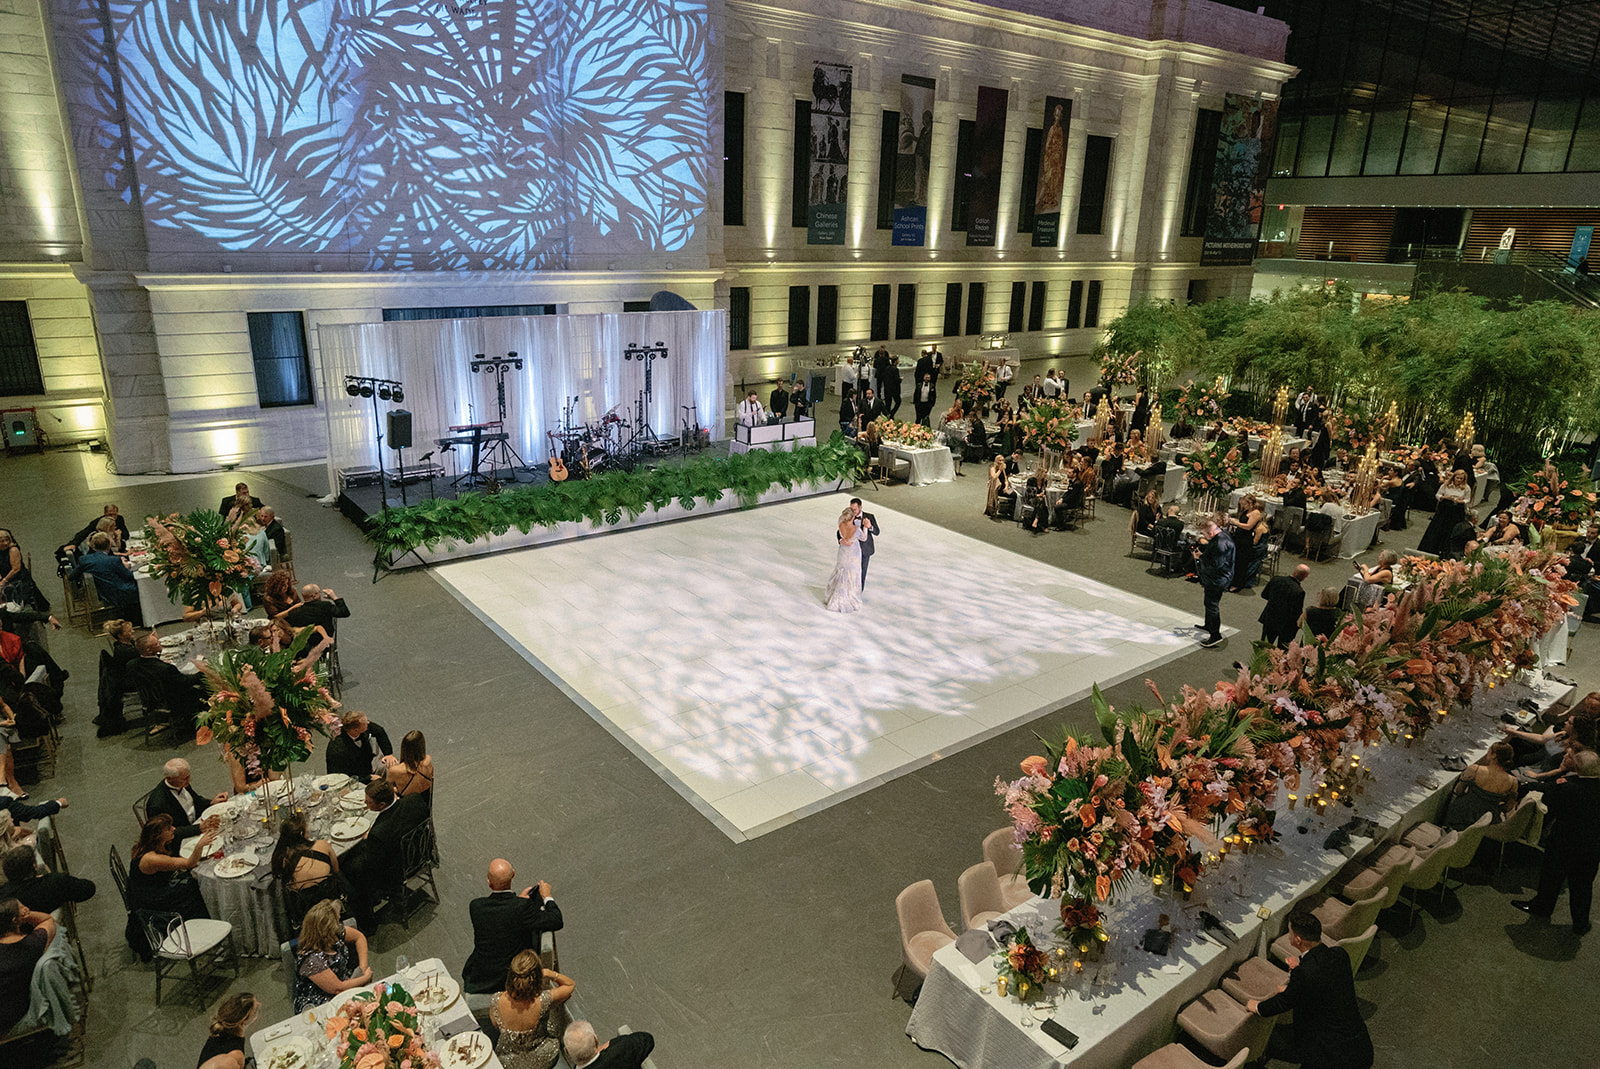 heatherlily wedding at Cleveland Museum of Art, best florist for an event at the Cleveland Museum of Art, Palm Spring inspired wedding with white dance floor